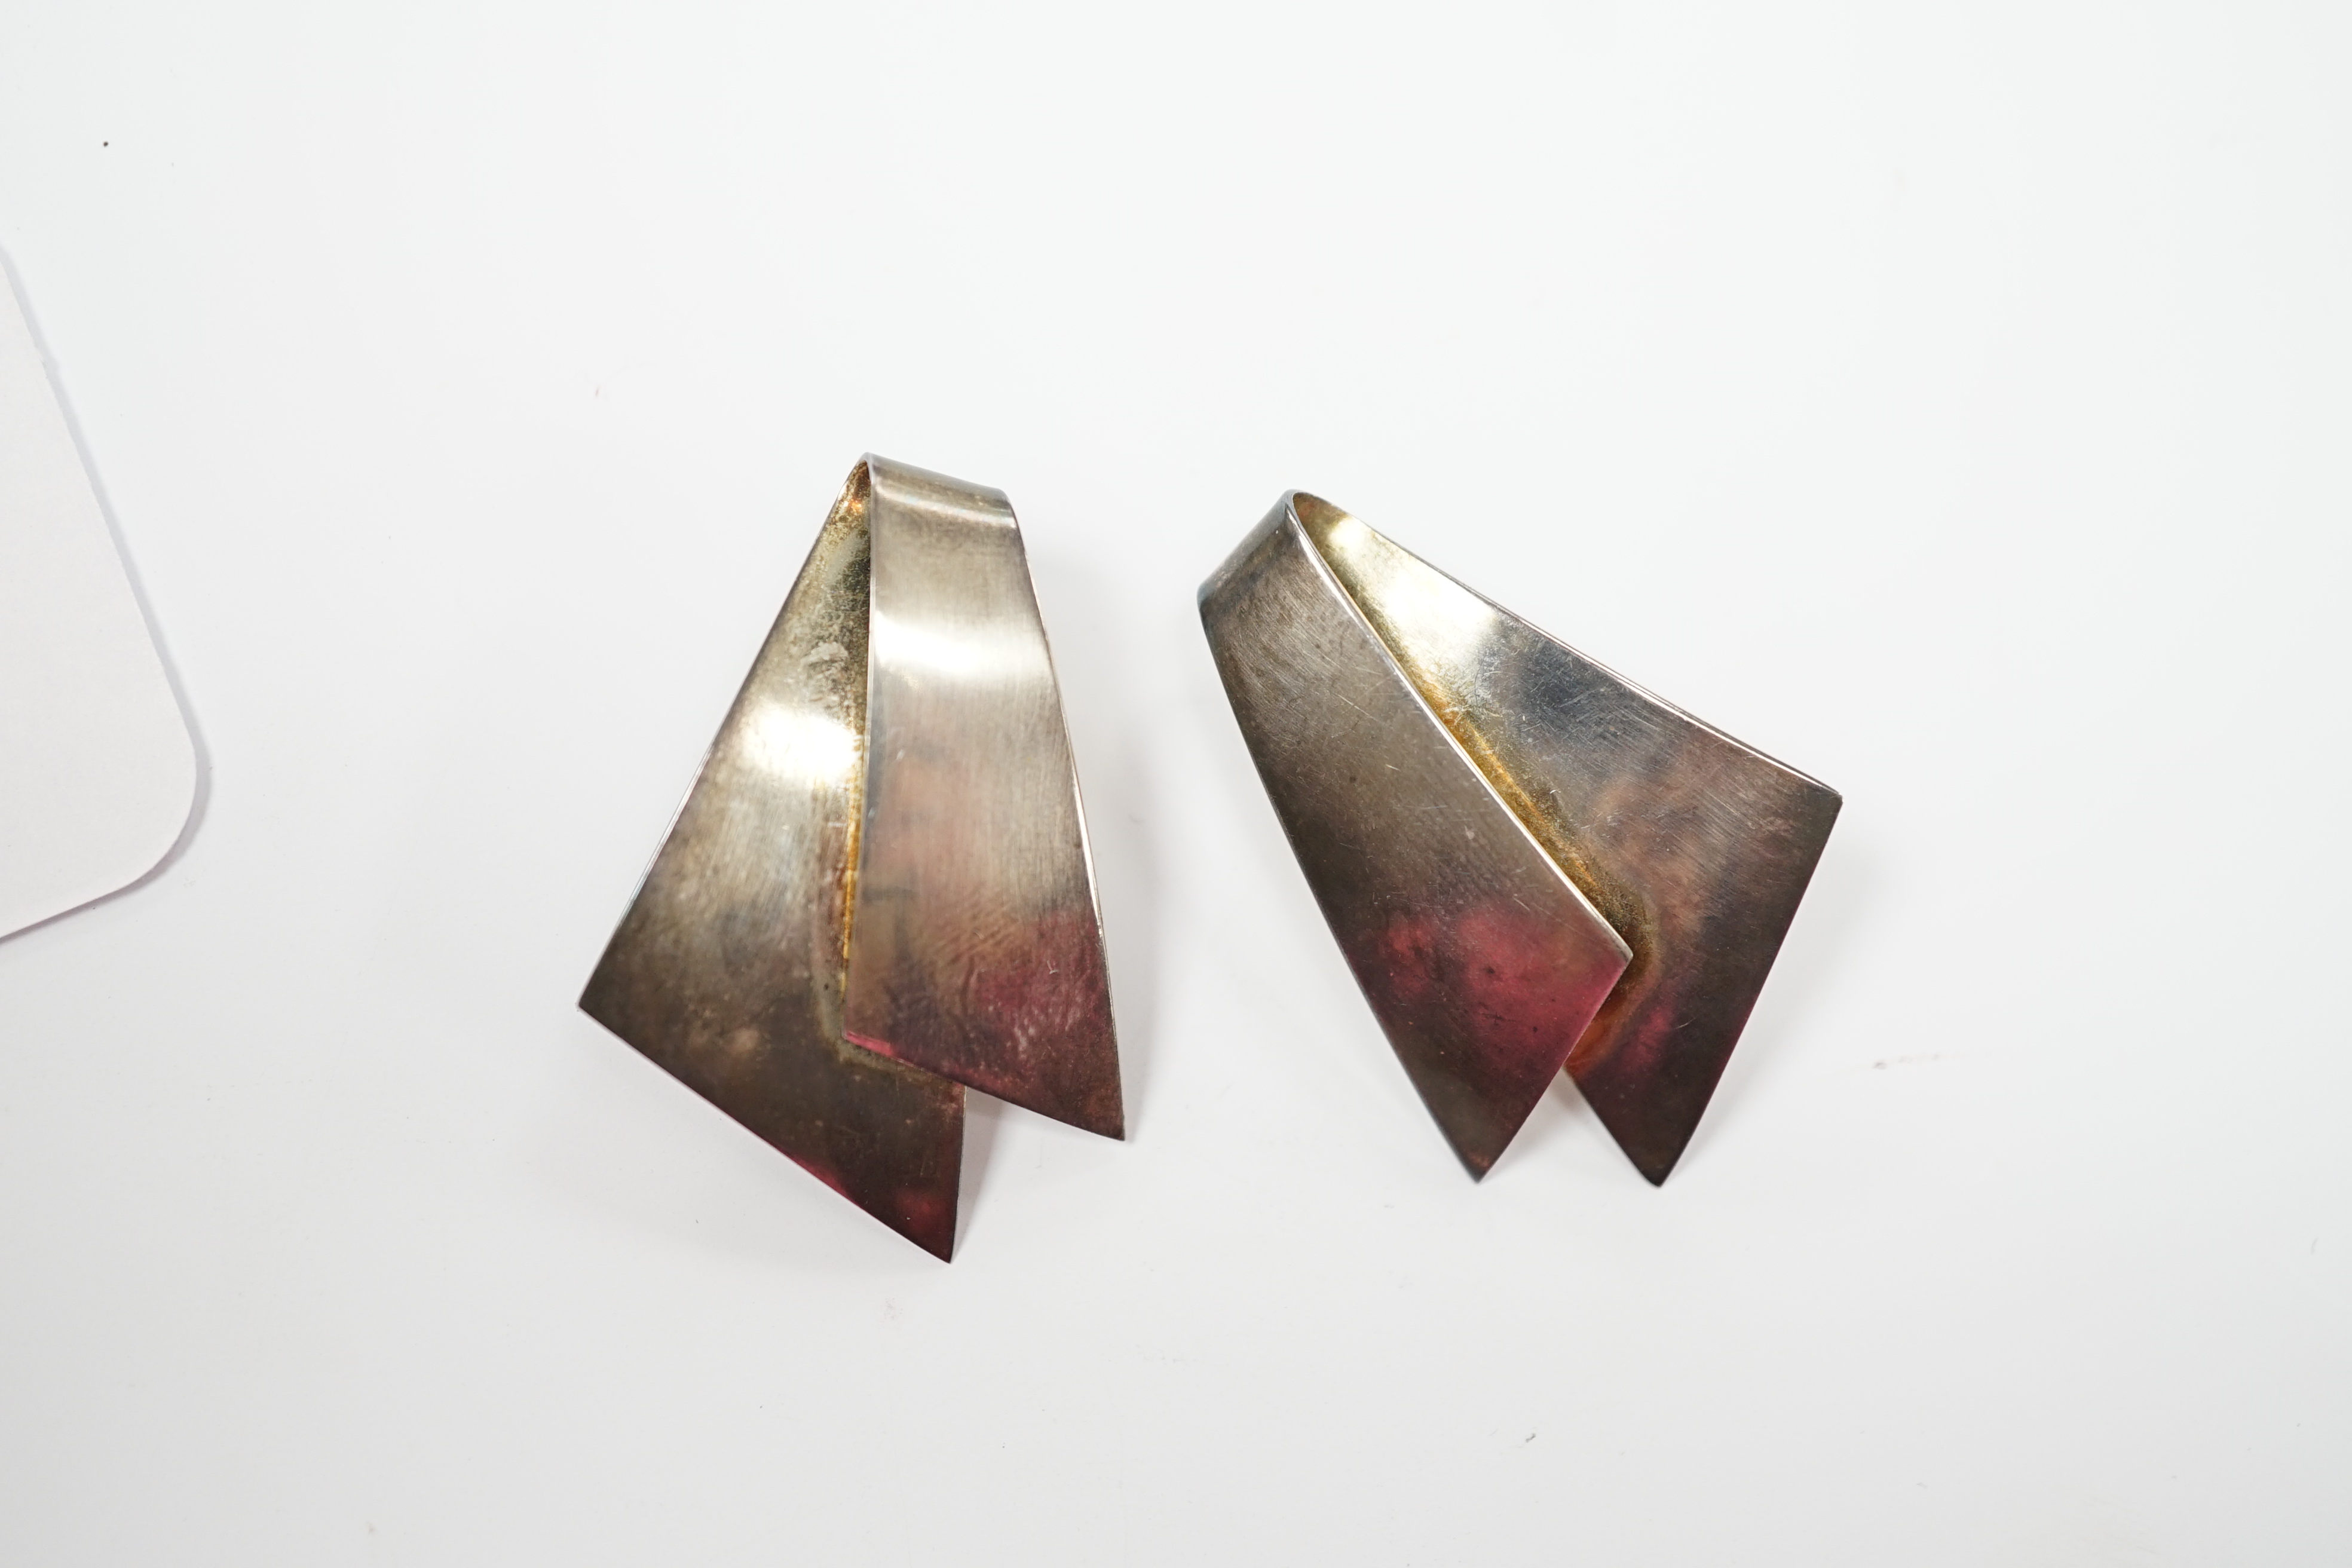 A pair of Georg Jensen sterling ear clips, design no. 201, 38mm, with Georg Jensen box.